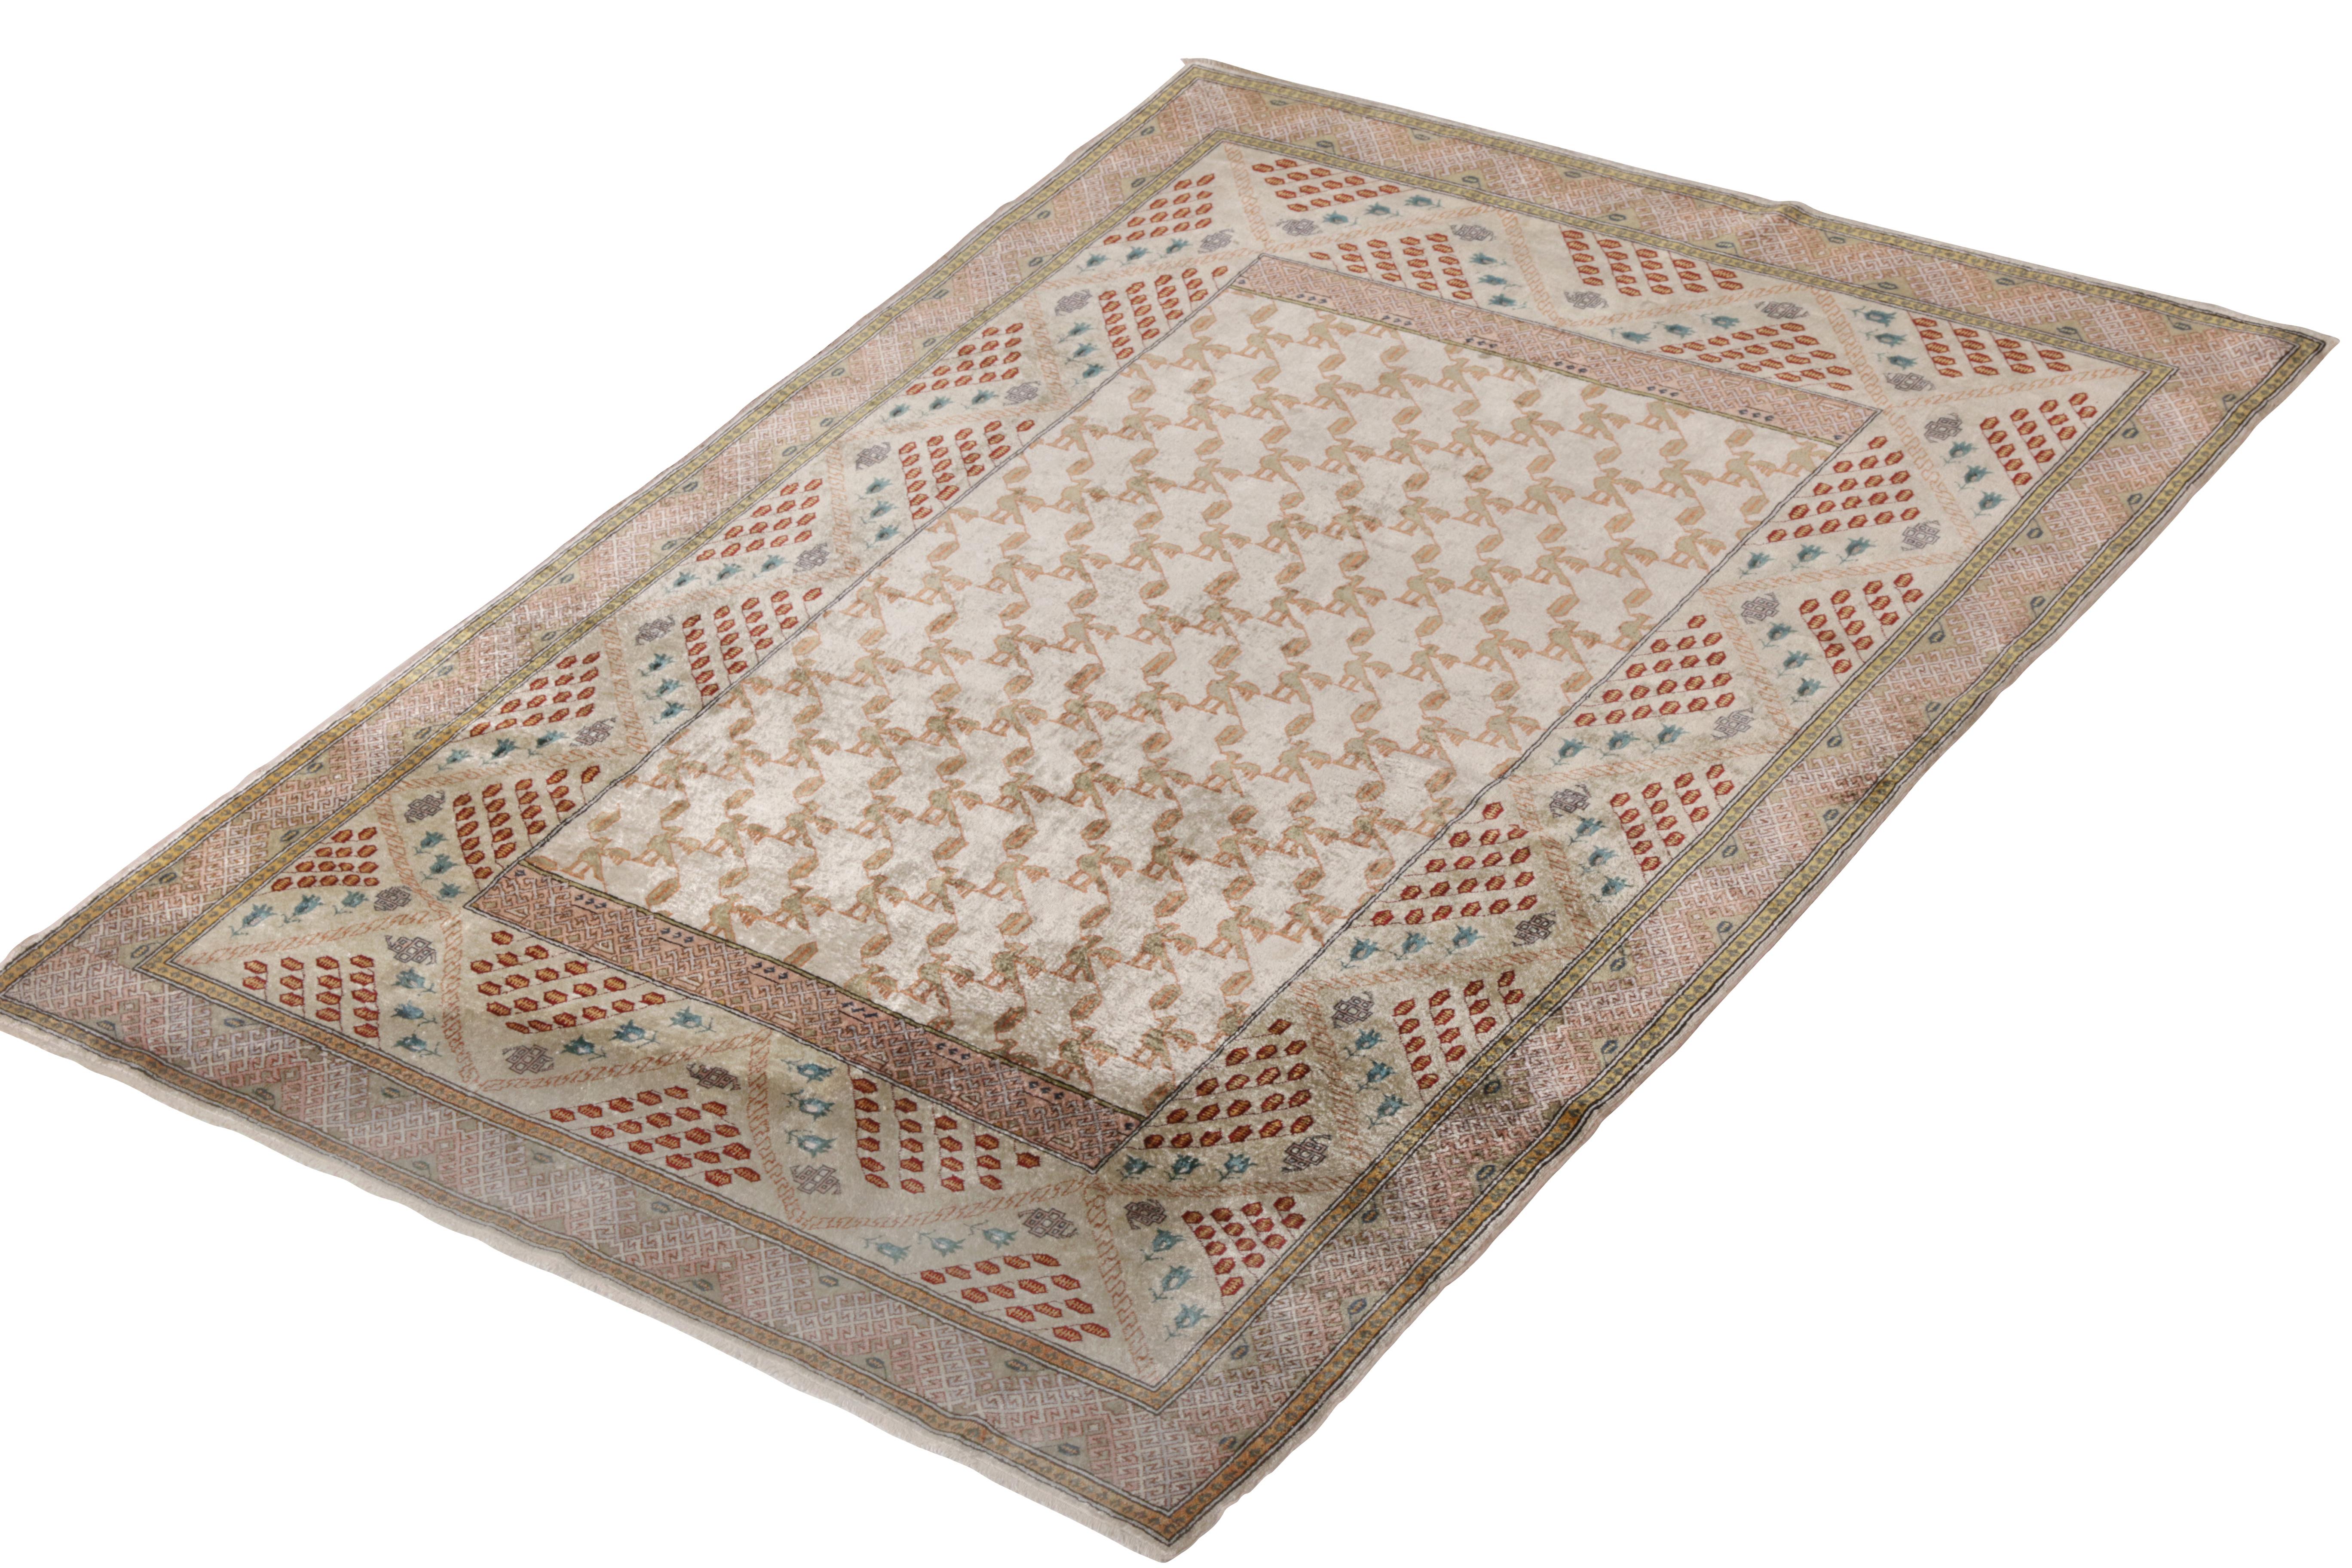 A spectacular antique 4x6 Hereke rug of hand-knotted silk and metal yarns, originating from Turkey circa 1910-1920. Enjoying a subtle pink accent atop beige-brown colorways, complementing a unique series of geometric and pictorial allusions.